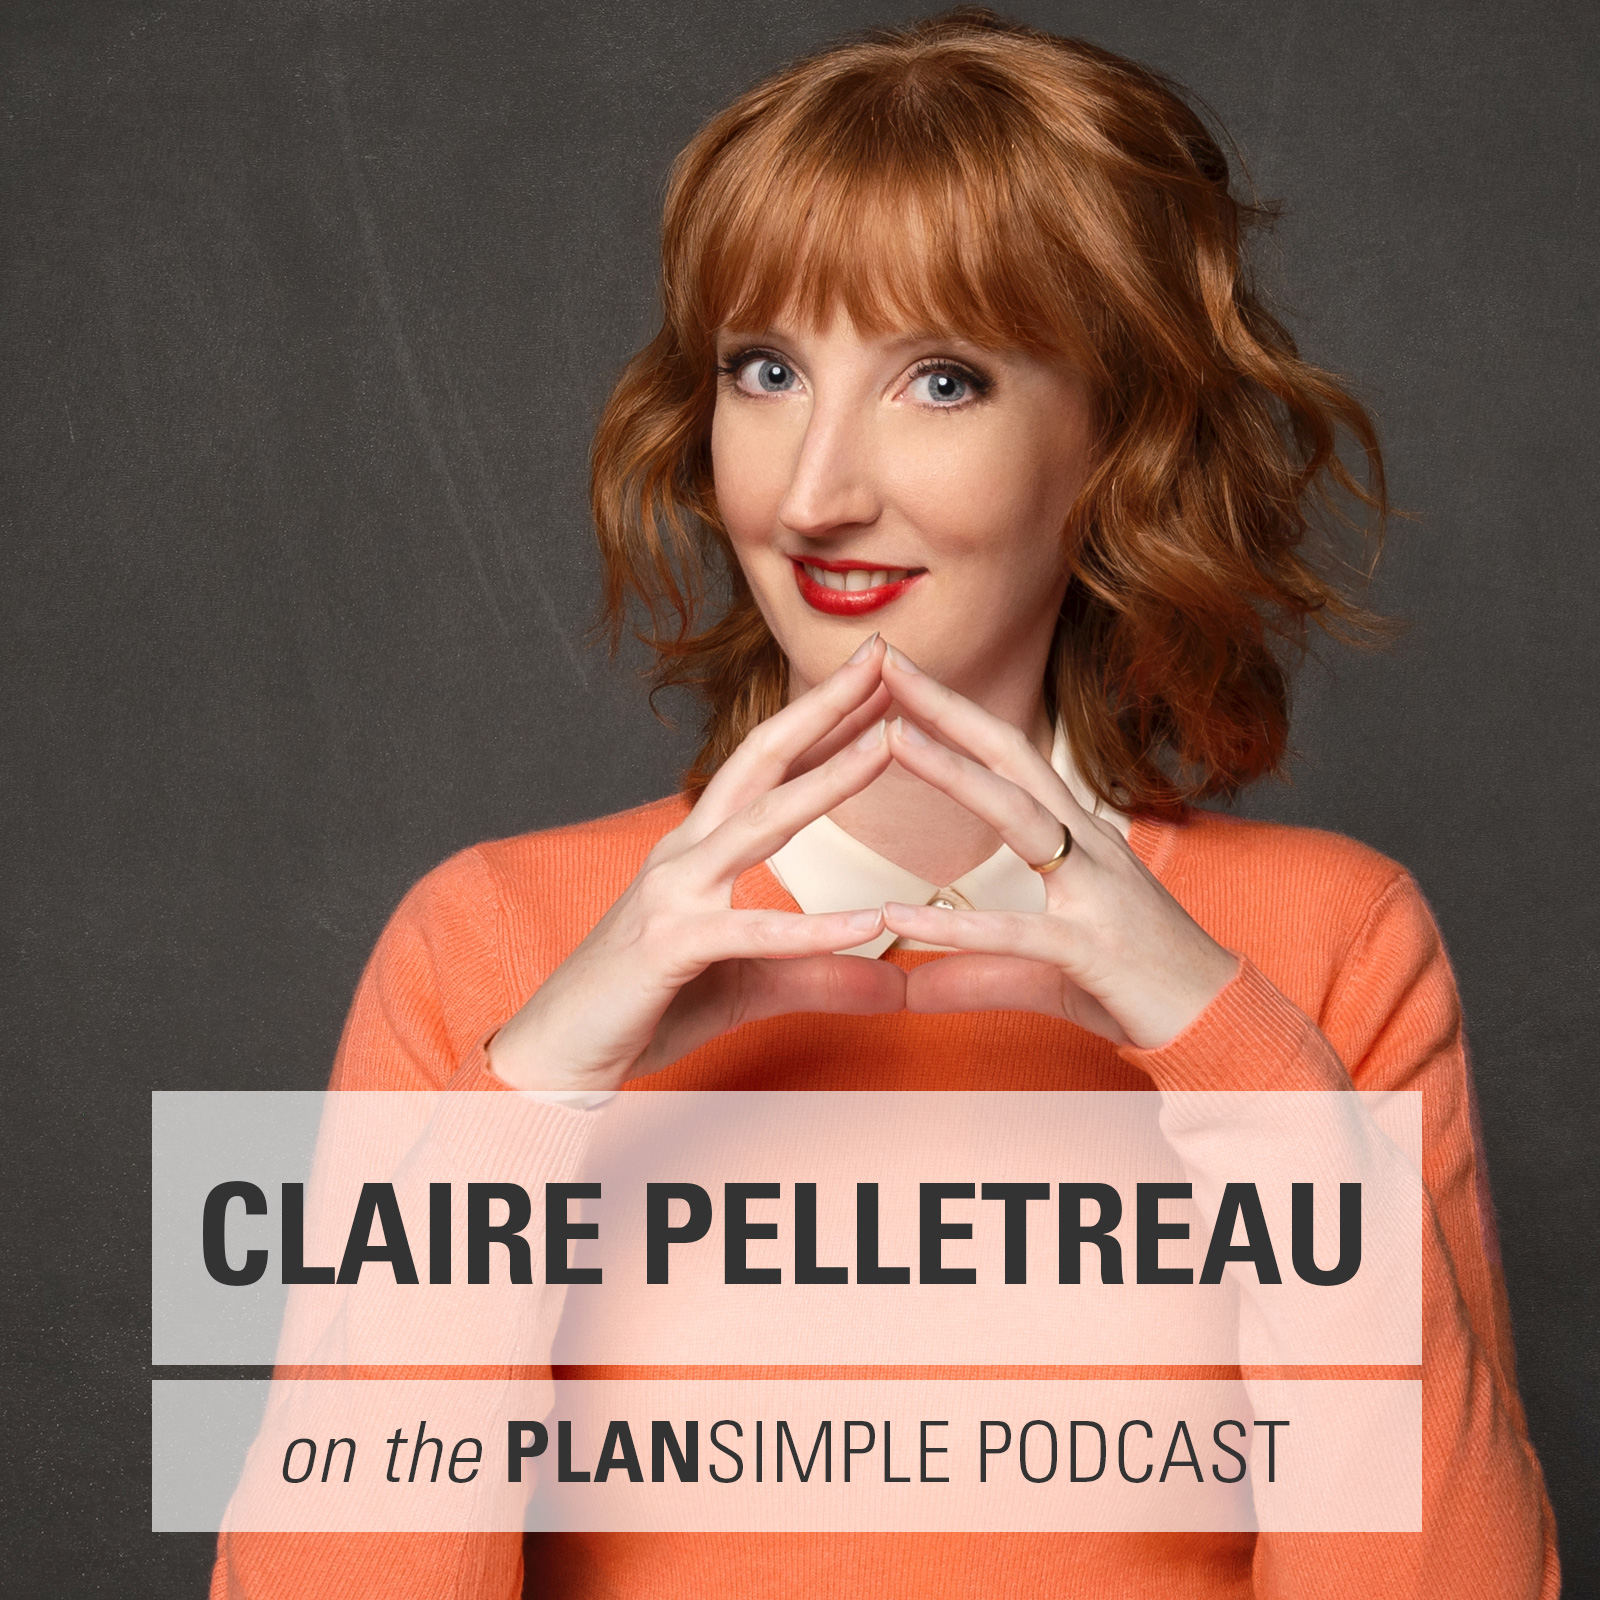 Work can be Self Care with Claire Pelletreau